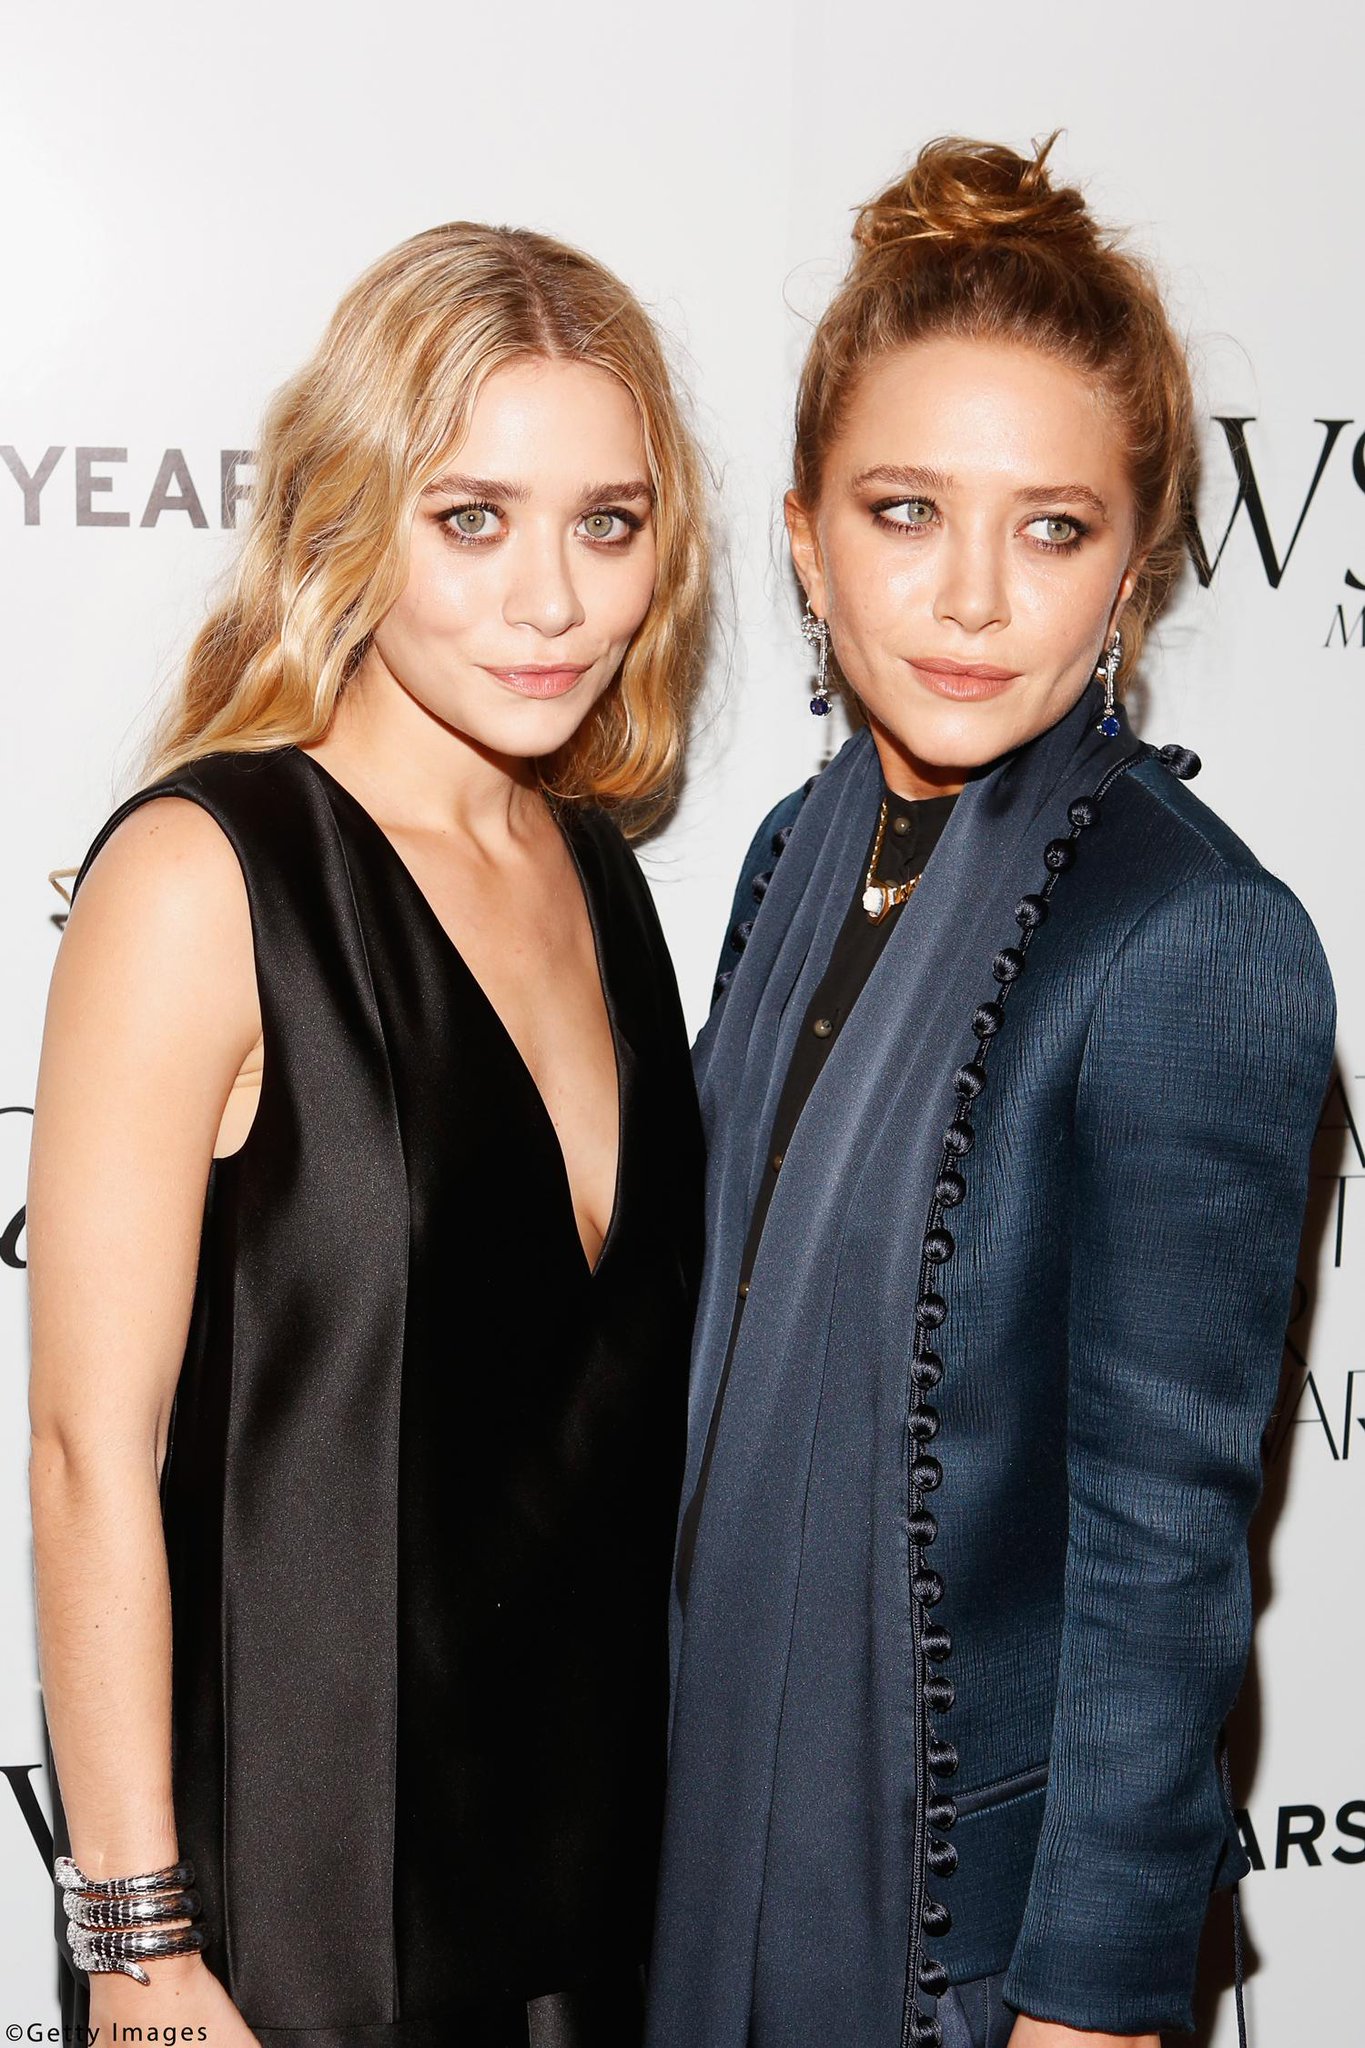 Happy birthday to the most stylish twins we know, Mary Kate & Ashley Olsen   